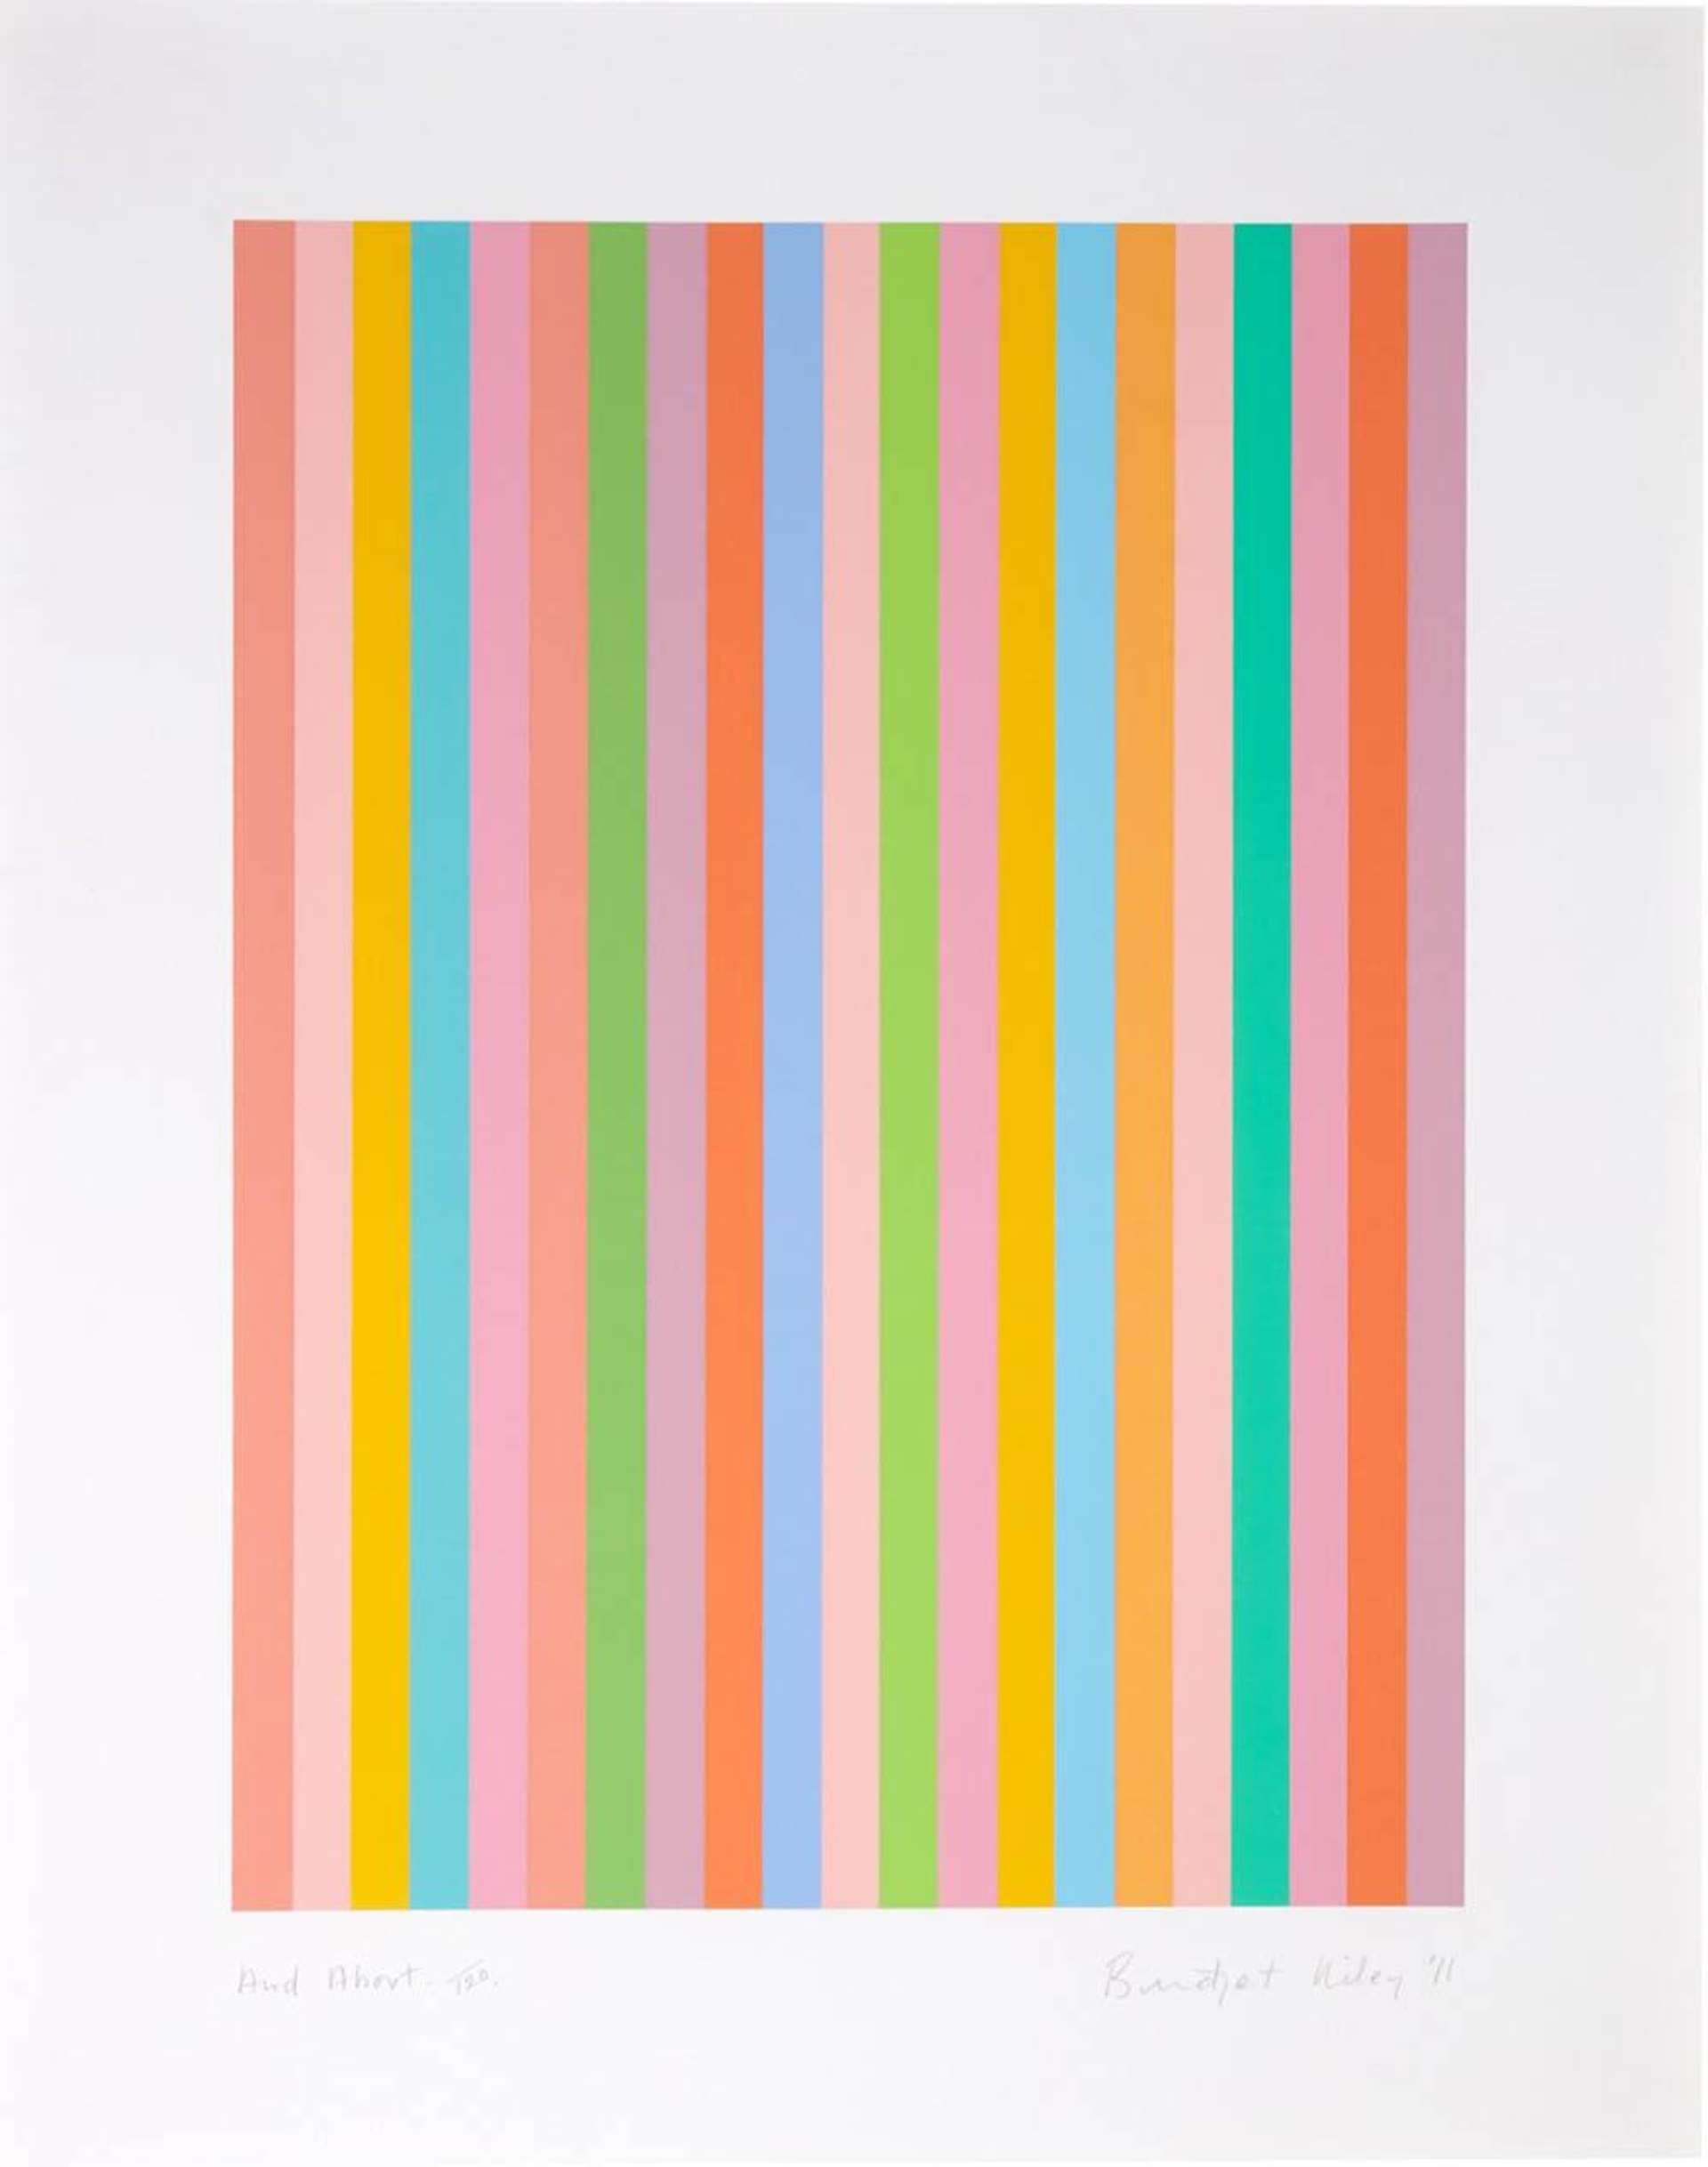 And About is composed of vertical lines in eight varying colours, arranged in a seemingly random order, is instantly recognisable as the work of British painter Bridget Riley. 